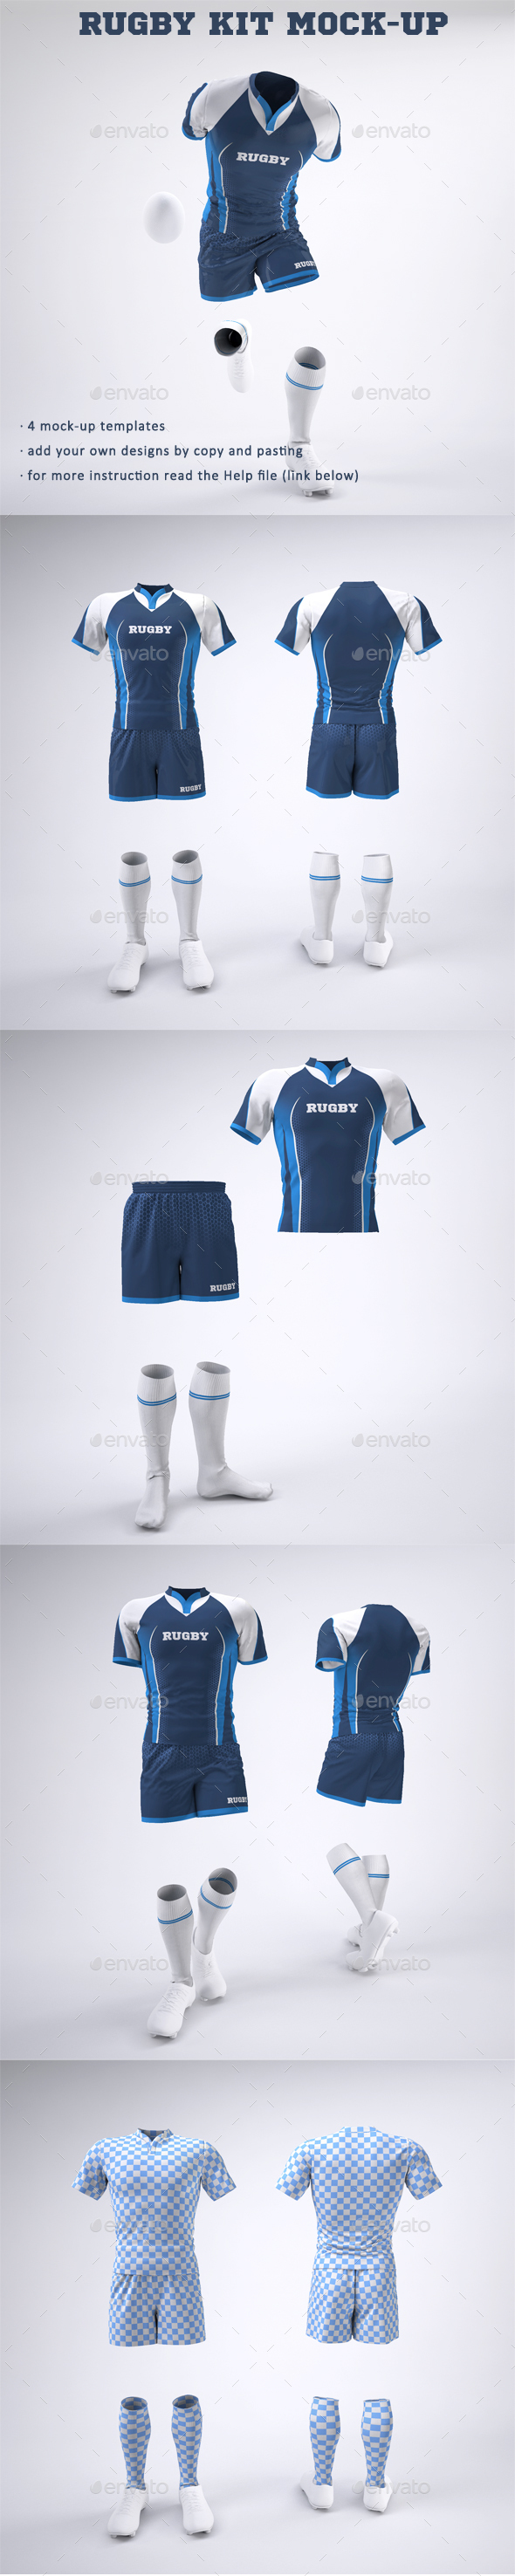 Download Football Uniform Mock Up For Photoshop » Tinkytyler.org ...